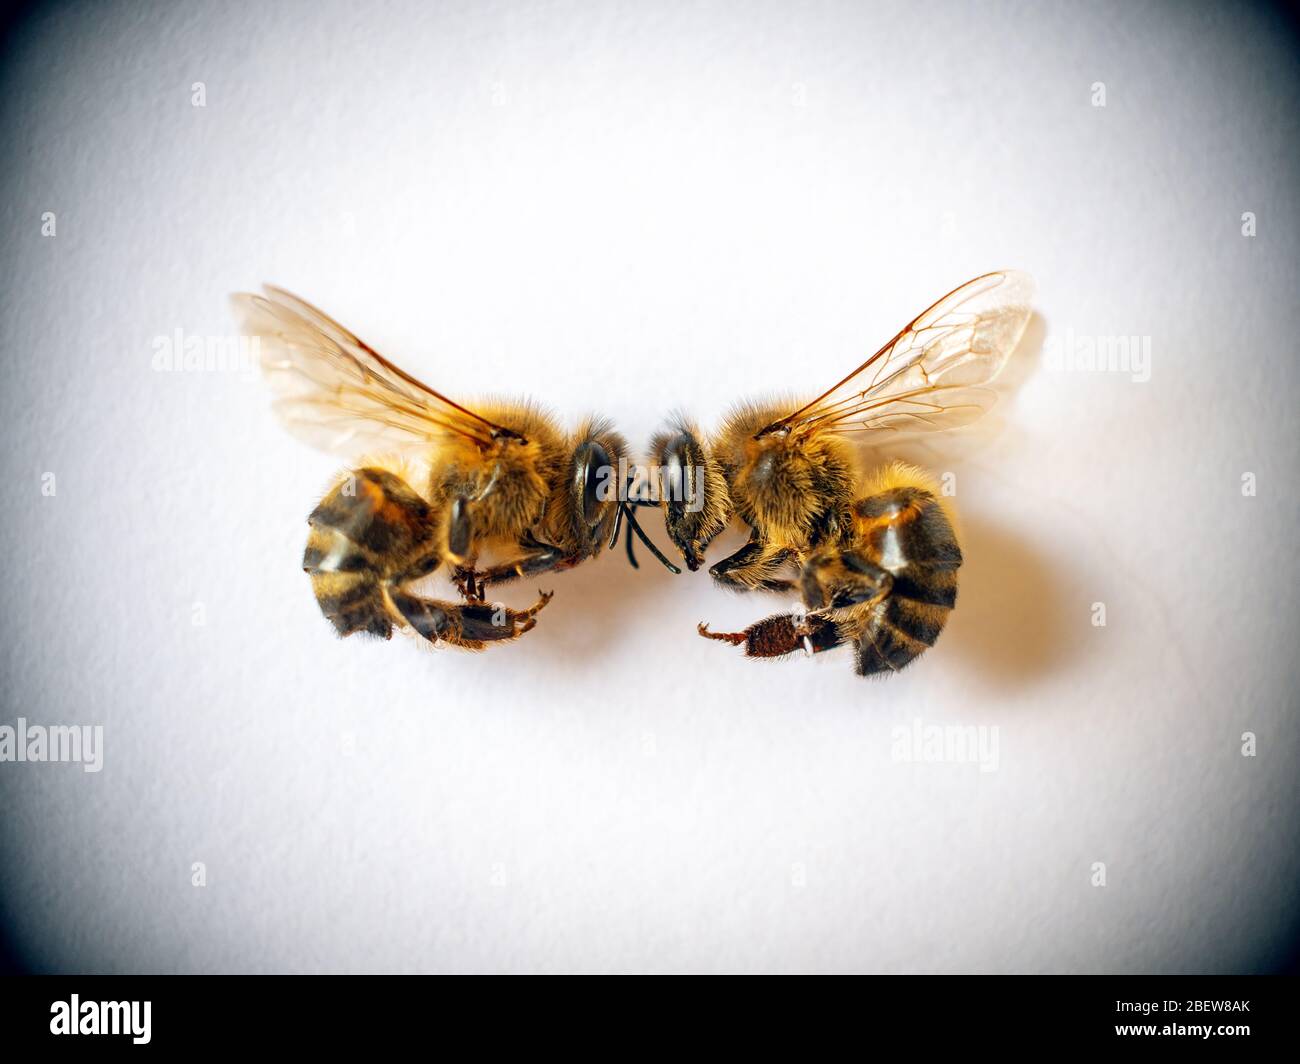 Two bees on a white background Stock Photo